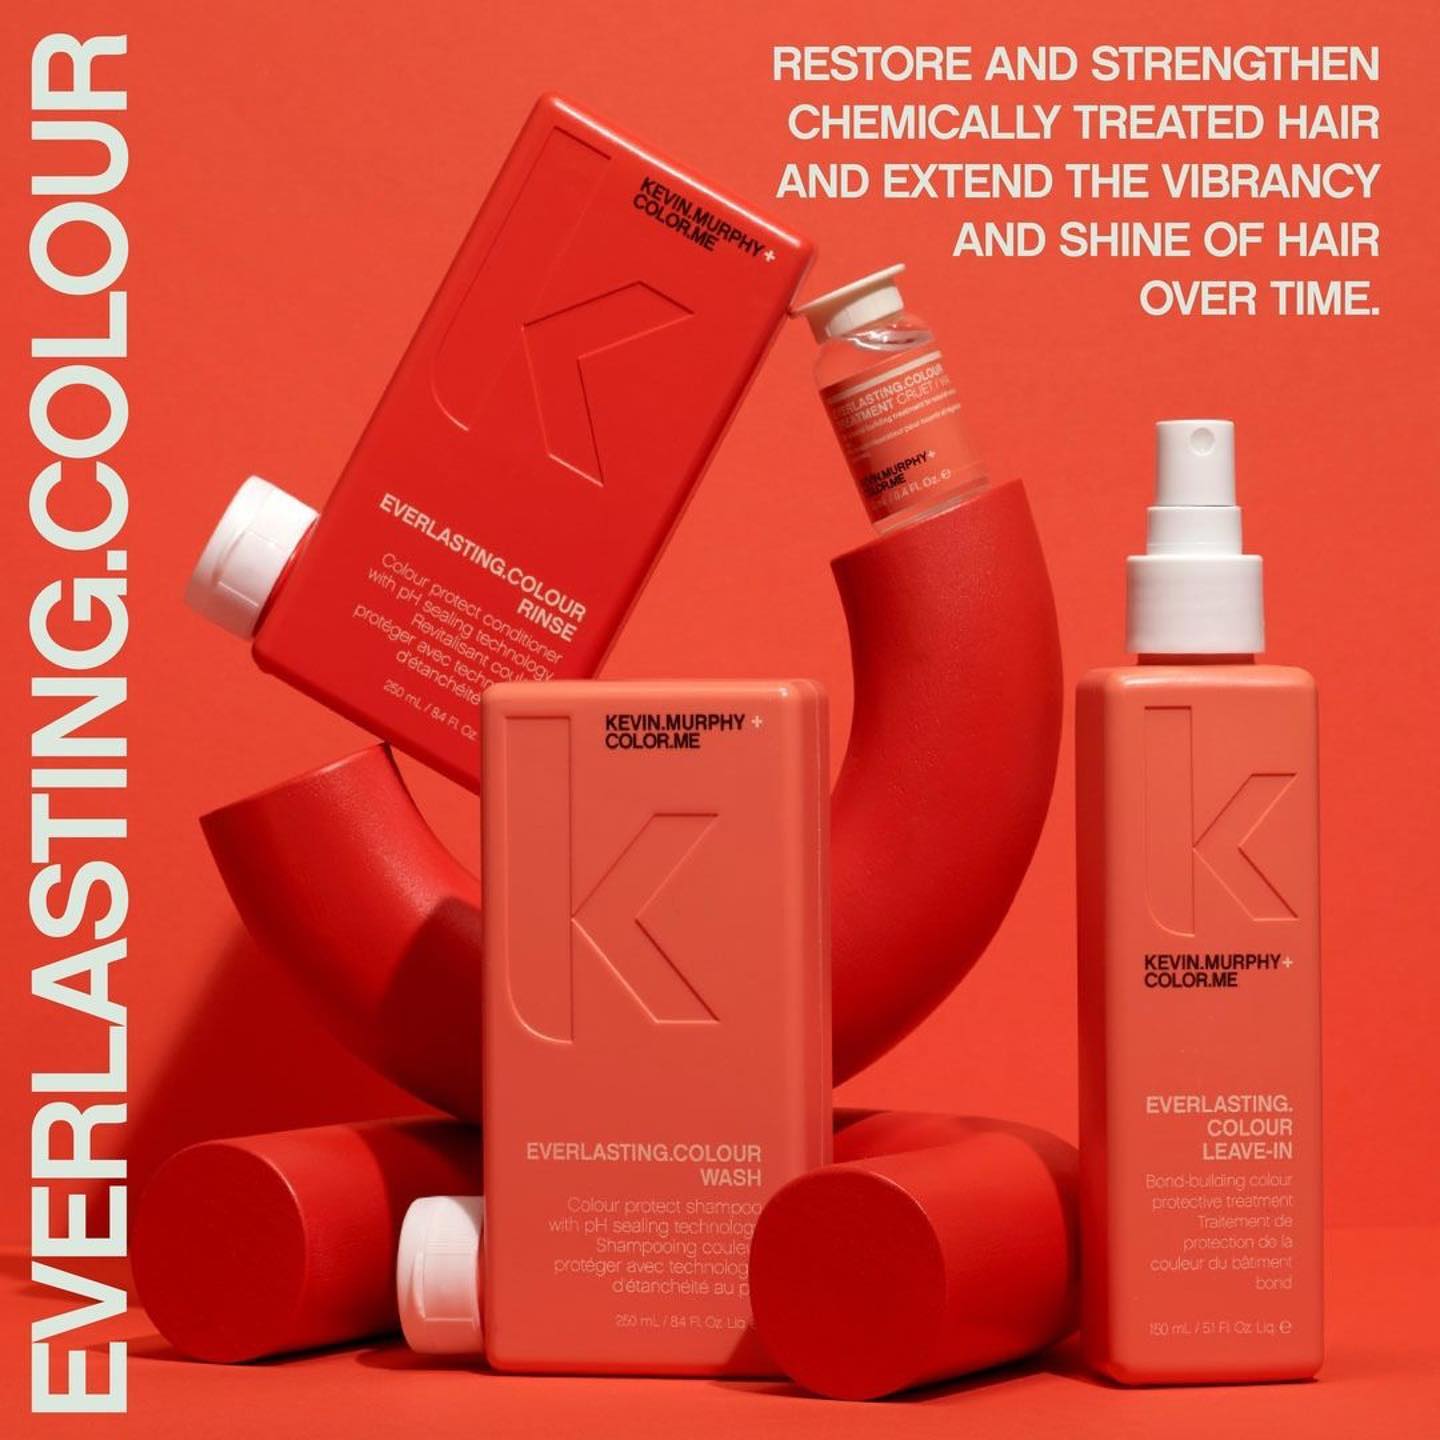 KEVIN MURPHY EVERLASTING.COLOUR WASH & RINSE